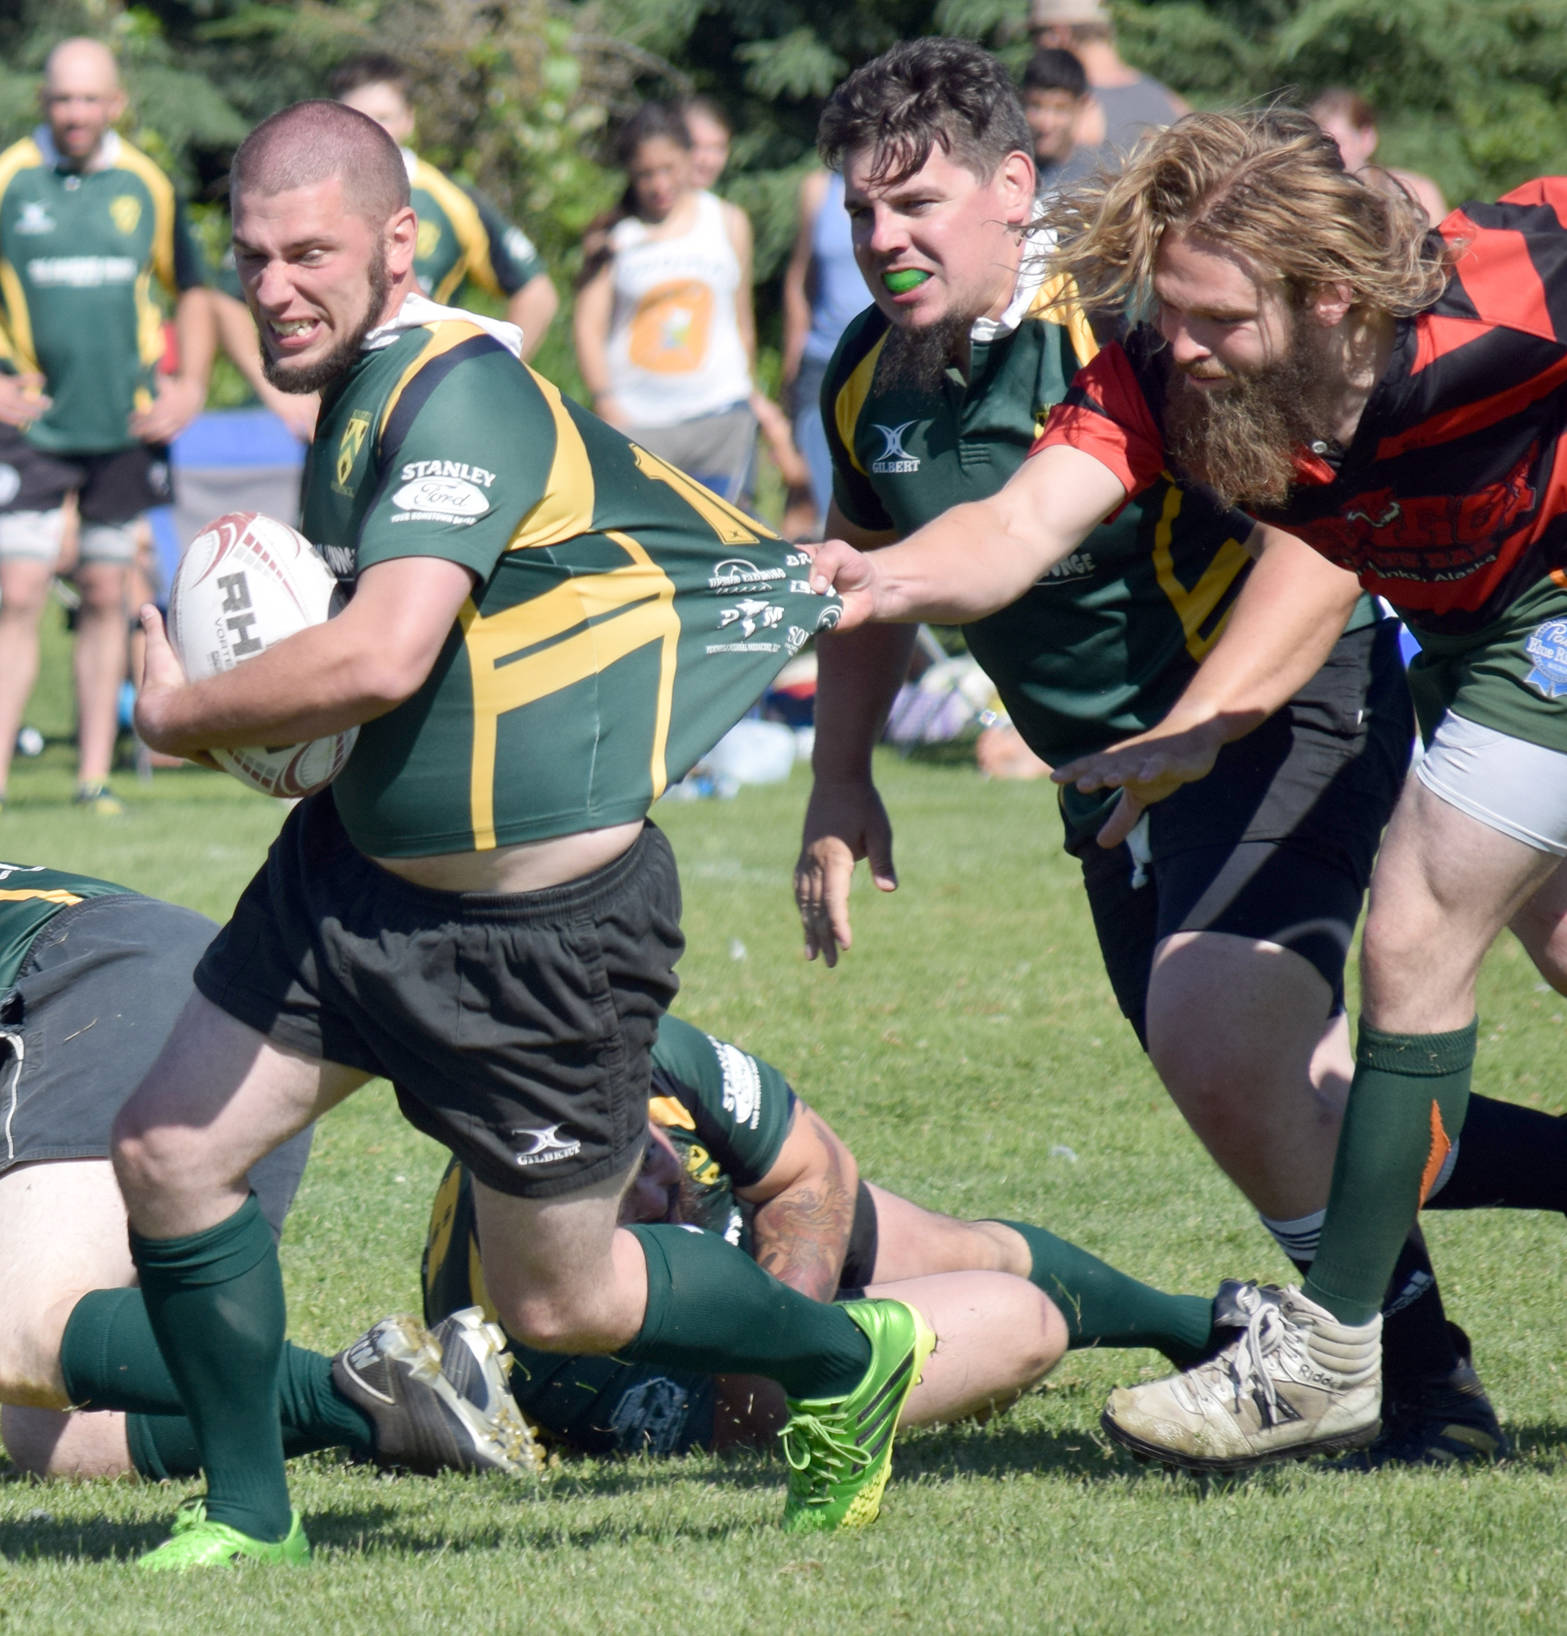 Trent Buning of Kenai River Wolfpack tries to escape the grasp of Samuel Warner of the Fairbanks Sun Dawgs on Saturday, July 22, 2017, at the Kenai Dipnet Fest Rugby 10s Tournament in Kenai. Danny Autrey Jr. of the Woldpack looks on. (Photo by Jeff Helminiak/Peninsula Clarion)